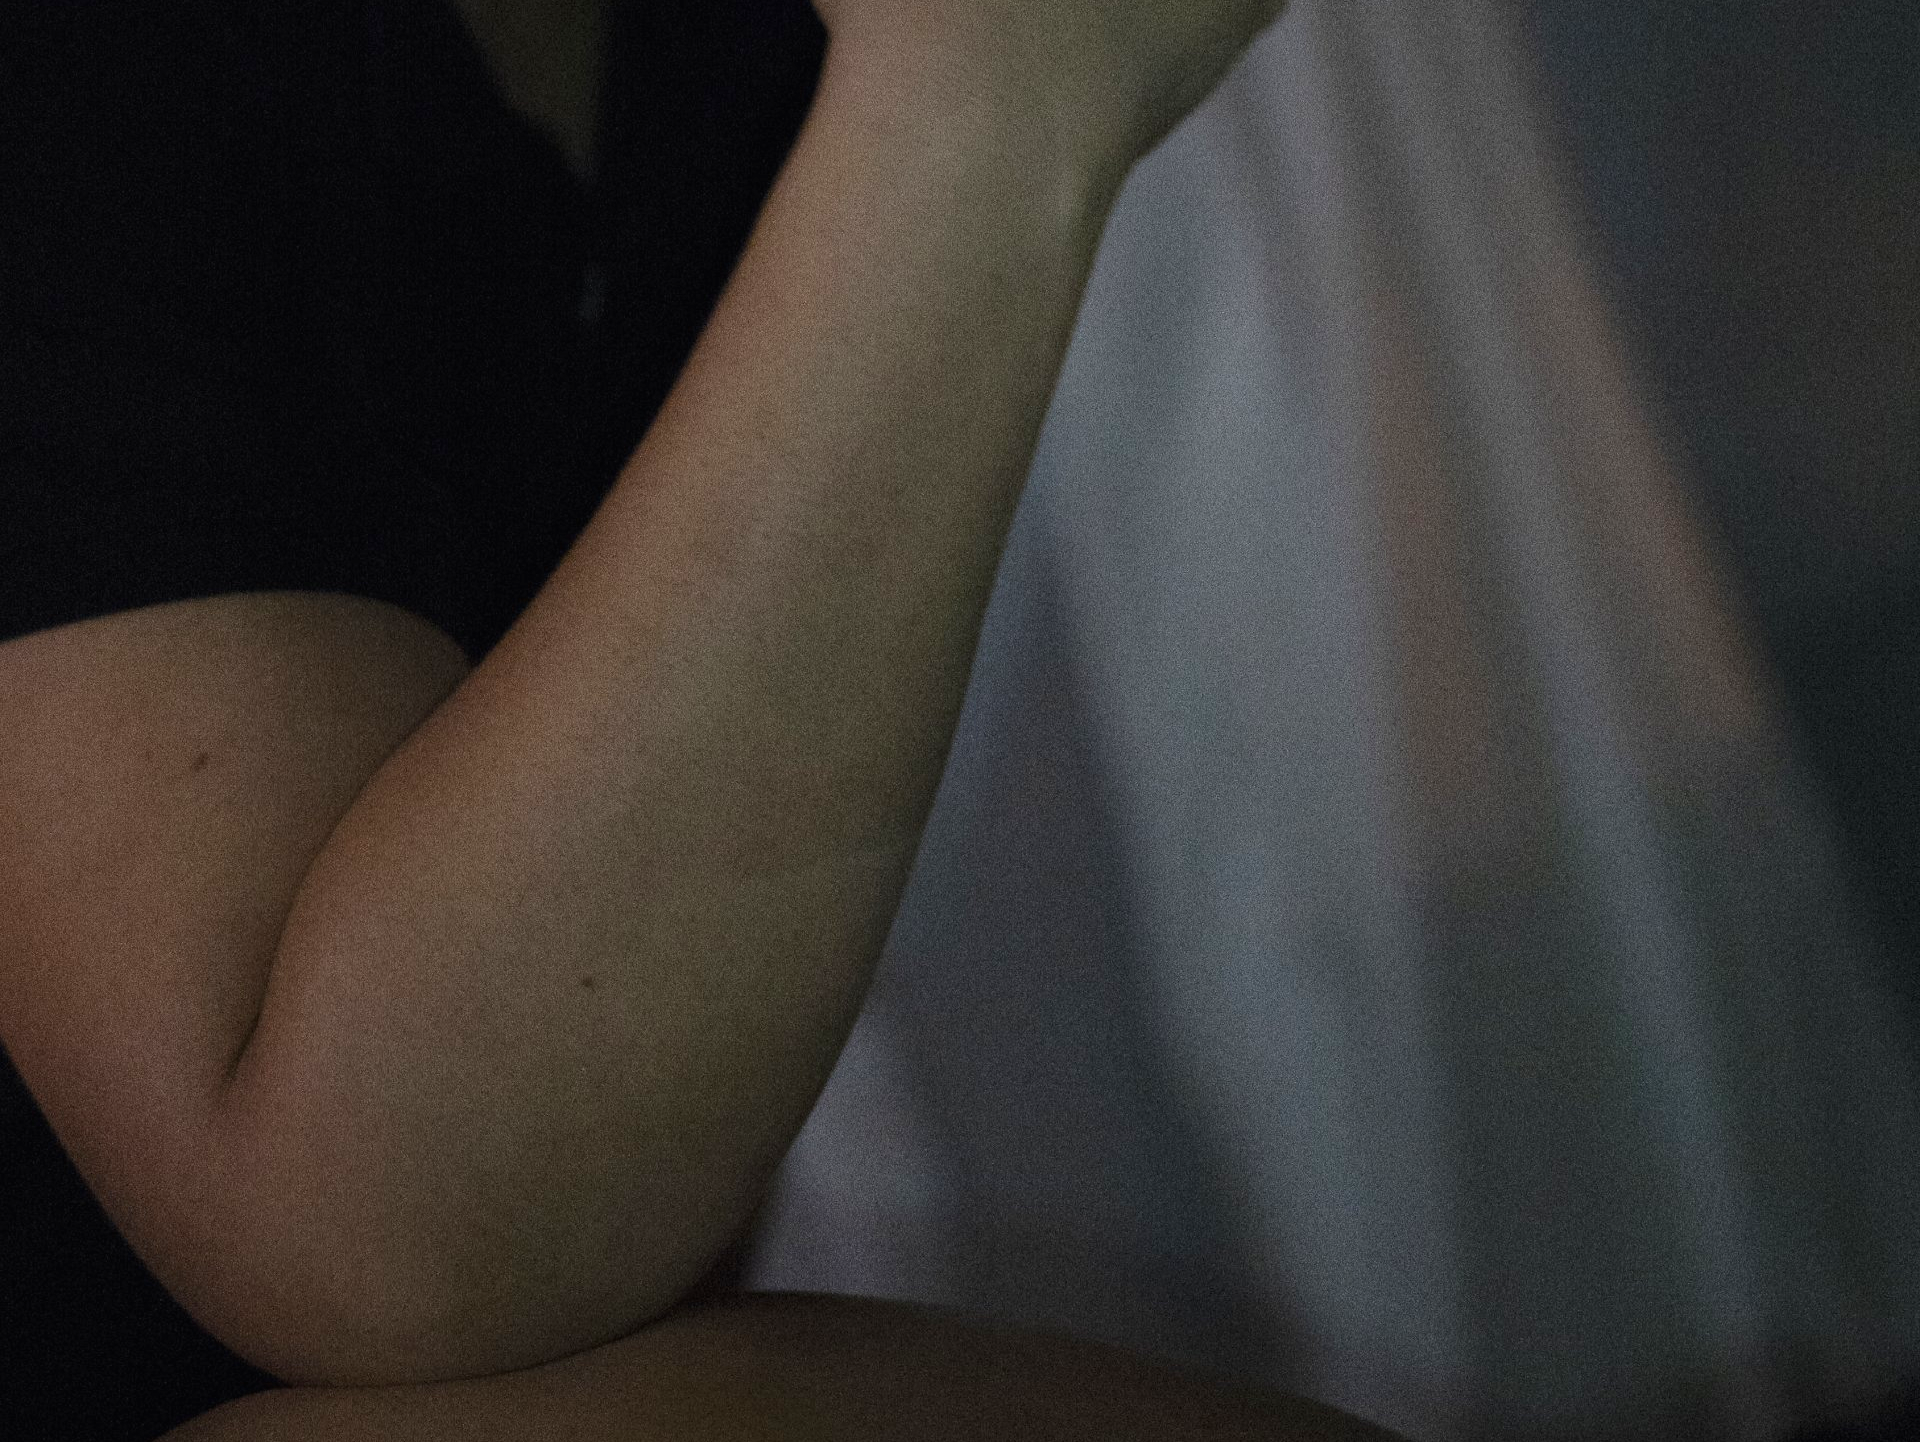 A close up of a person 's arm in a dark room.